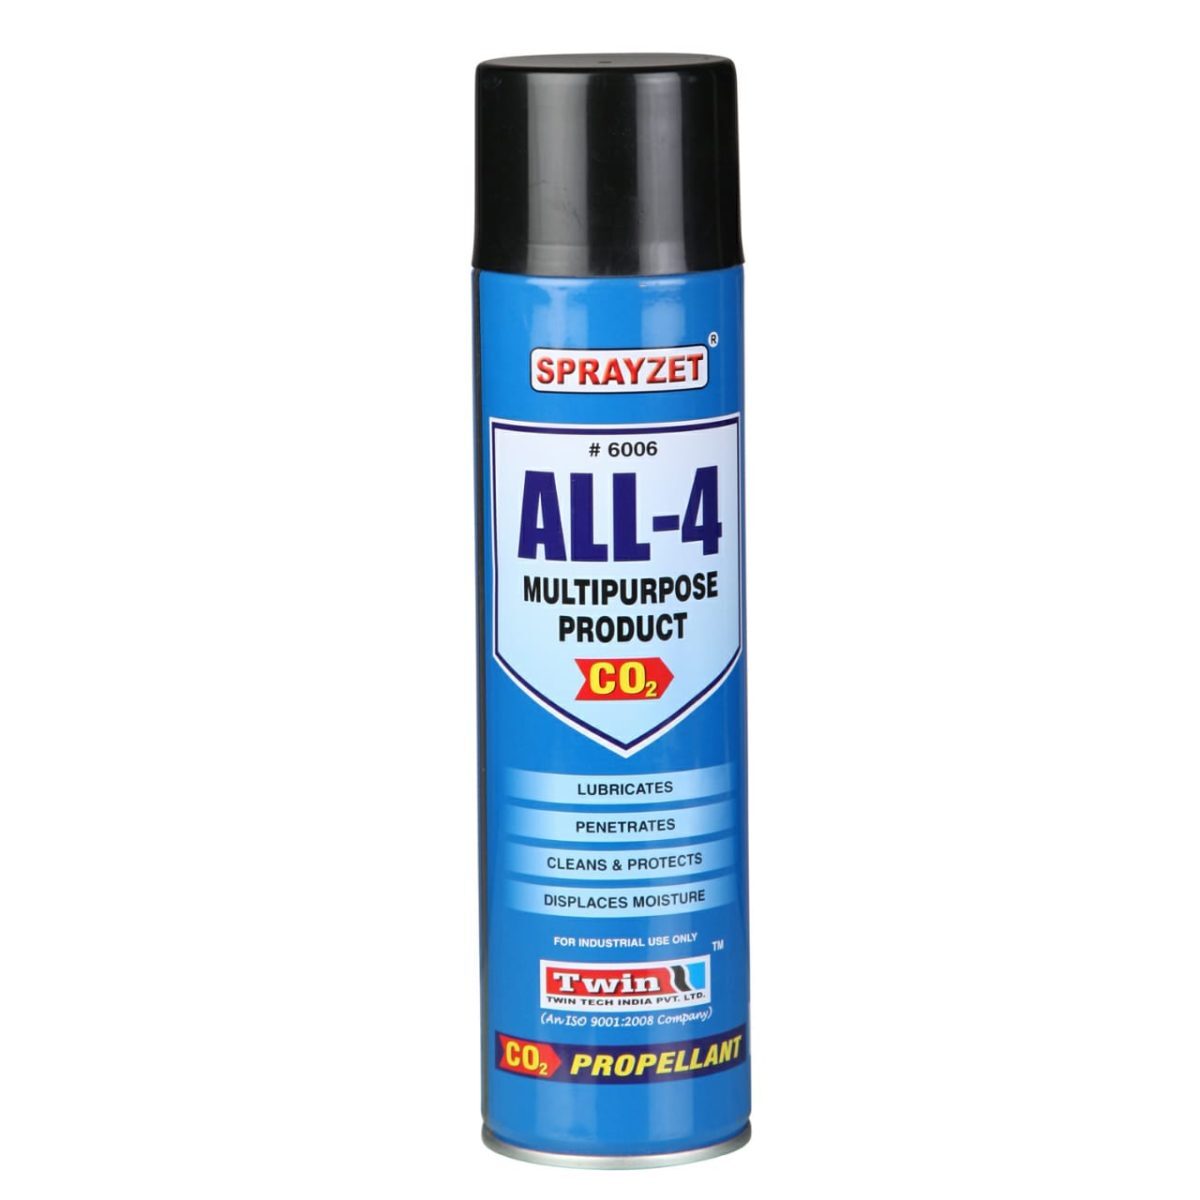 CarCARE Rust Remover Spray for Metal Car, Rust Remover Spray for Iron,  Steel Rust Removal Aerosol Spray Price in India - Buy CarCARE Rust Remover  Spray for Metal Car, Rust Remover Spray